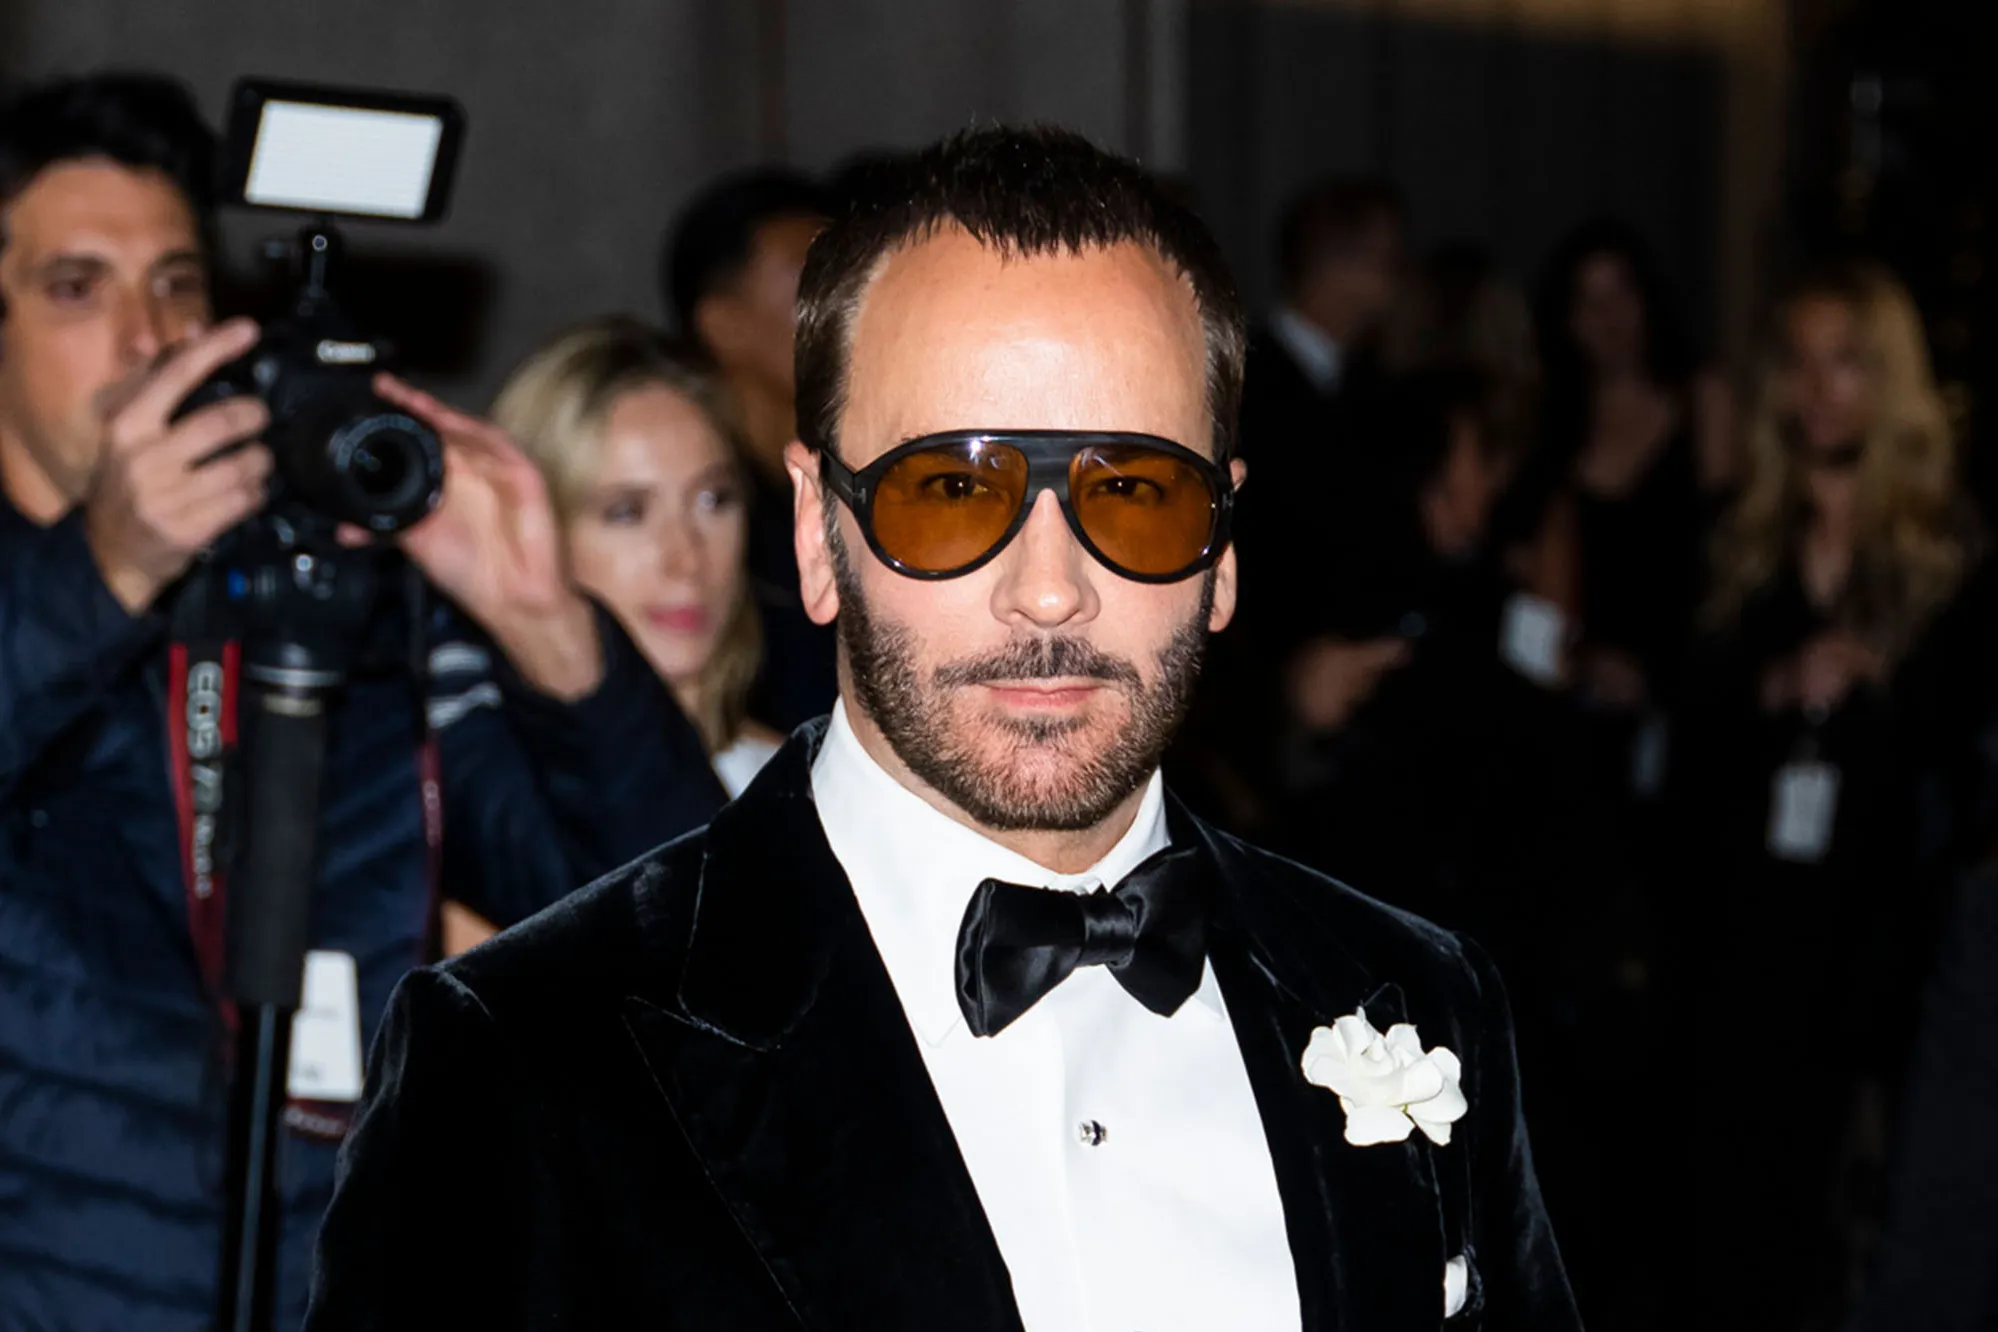 Tom Ford is a Freshly minted billionaire, thanks to the $2.8B Estée Lauder deal